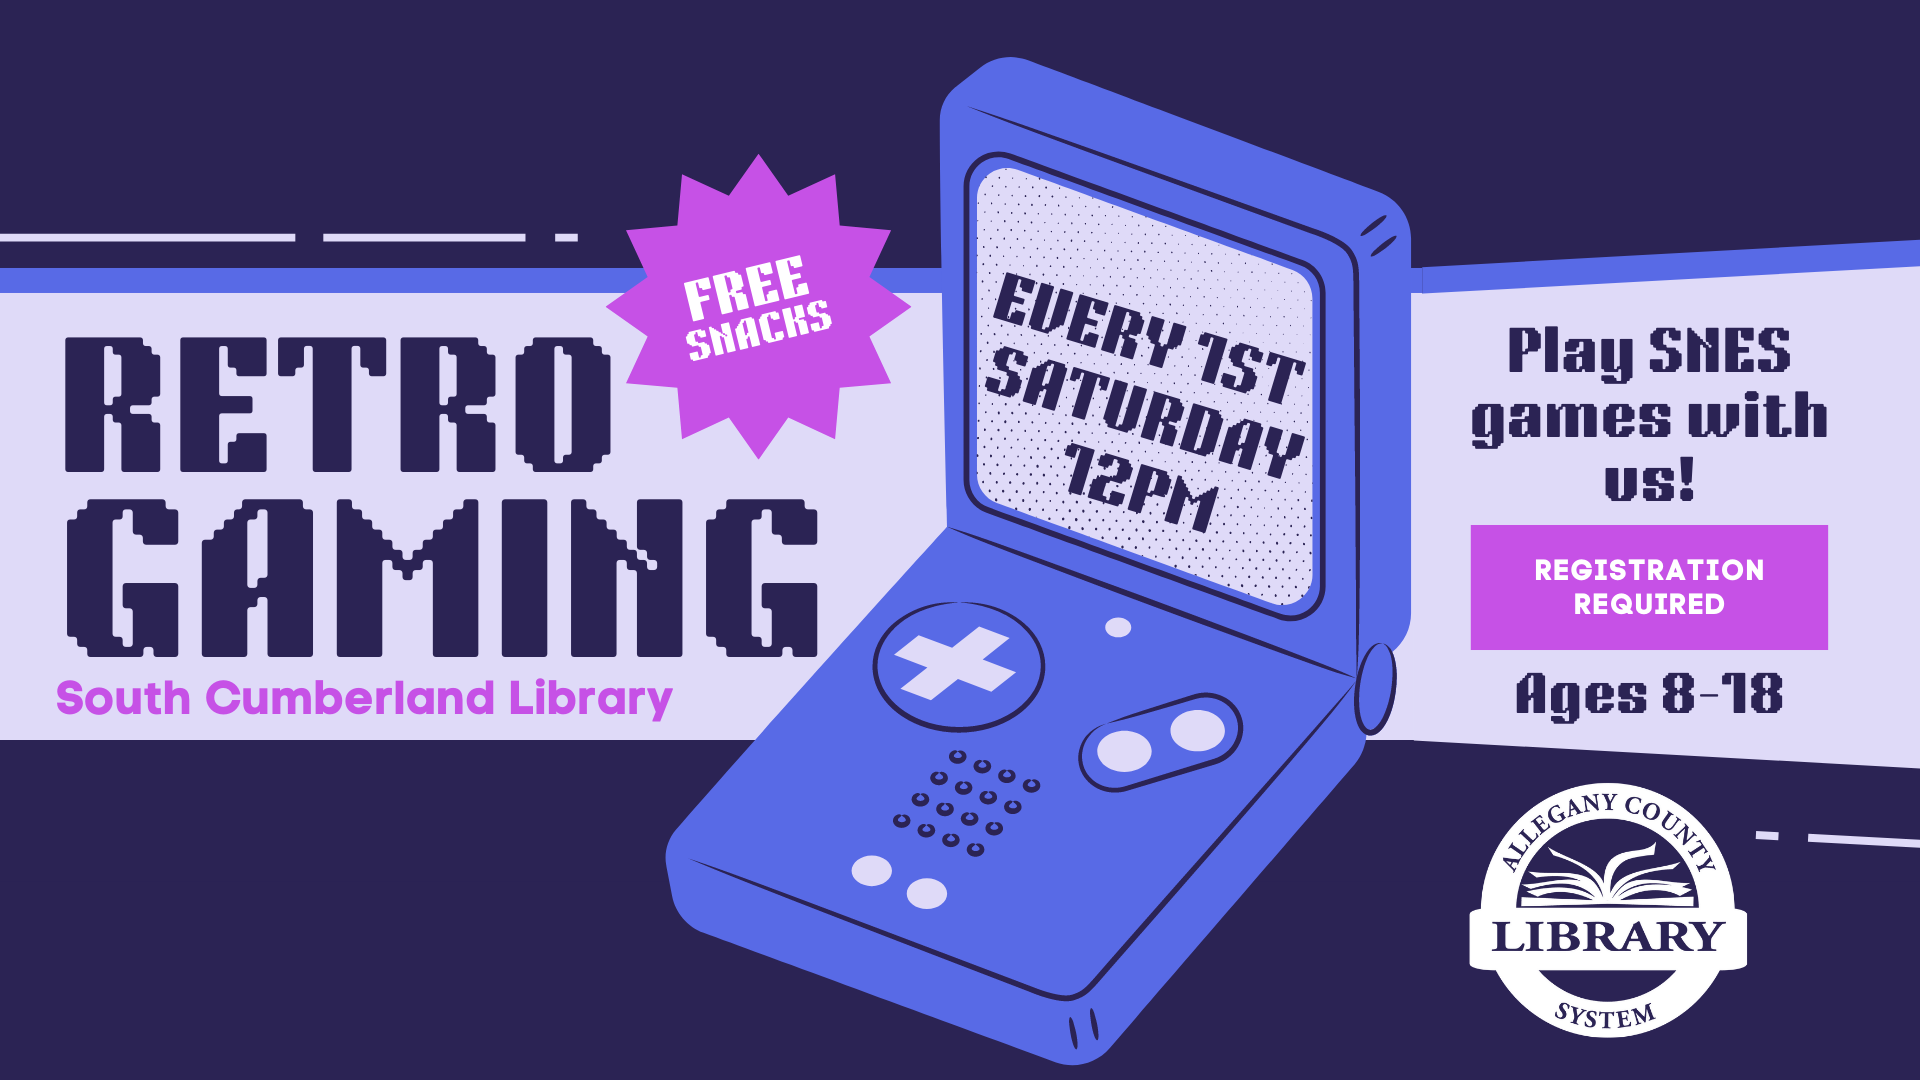 Retro gaming event details with purple gameboy in the center